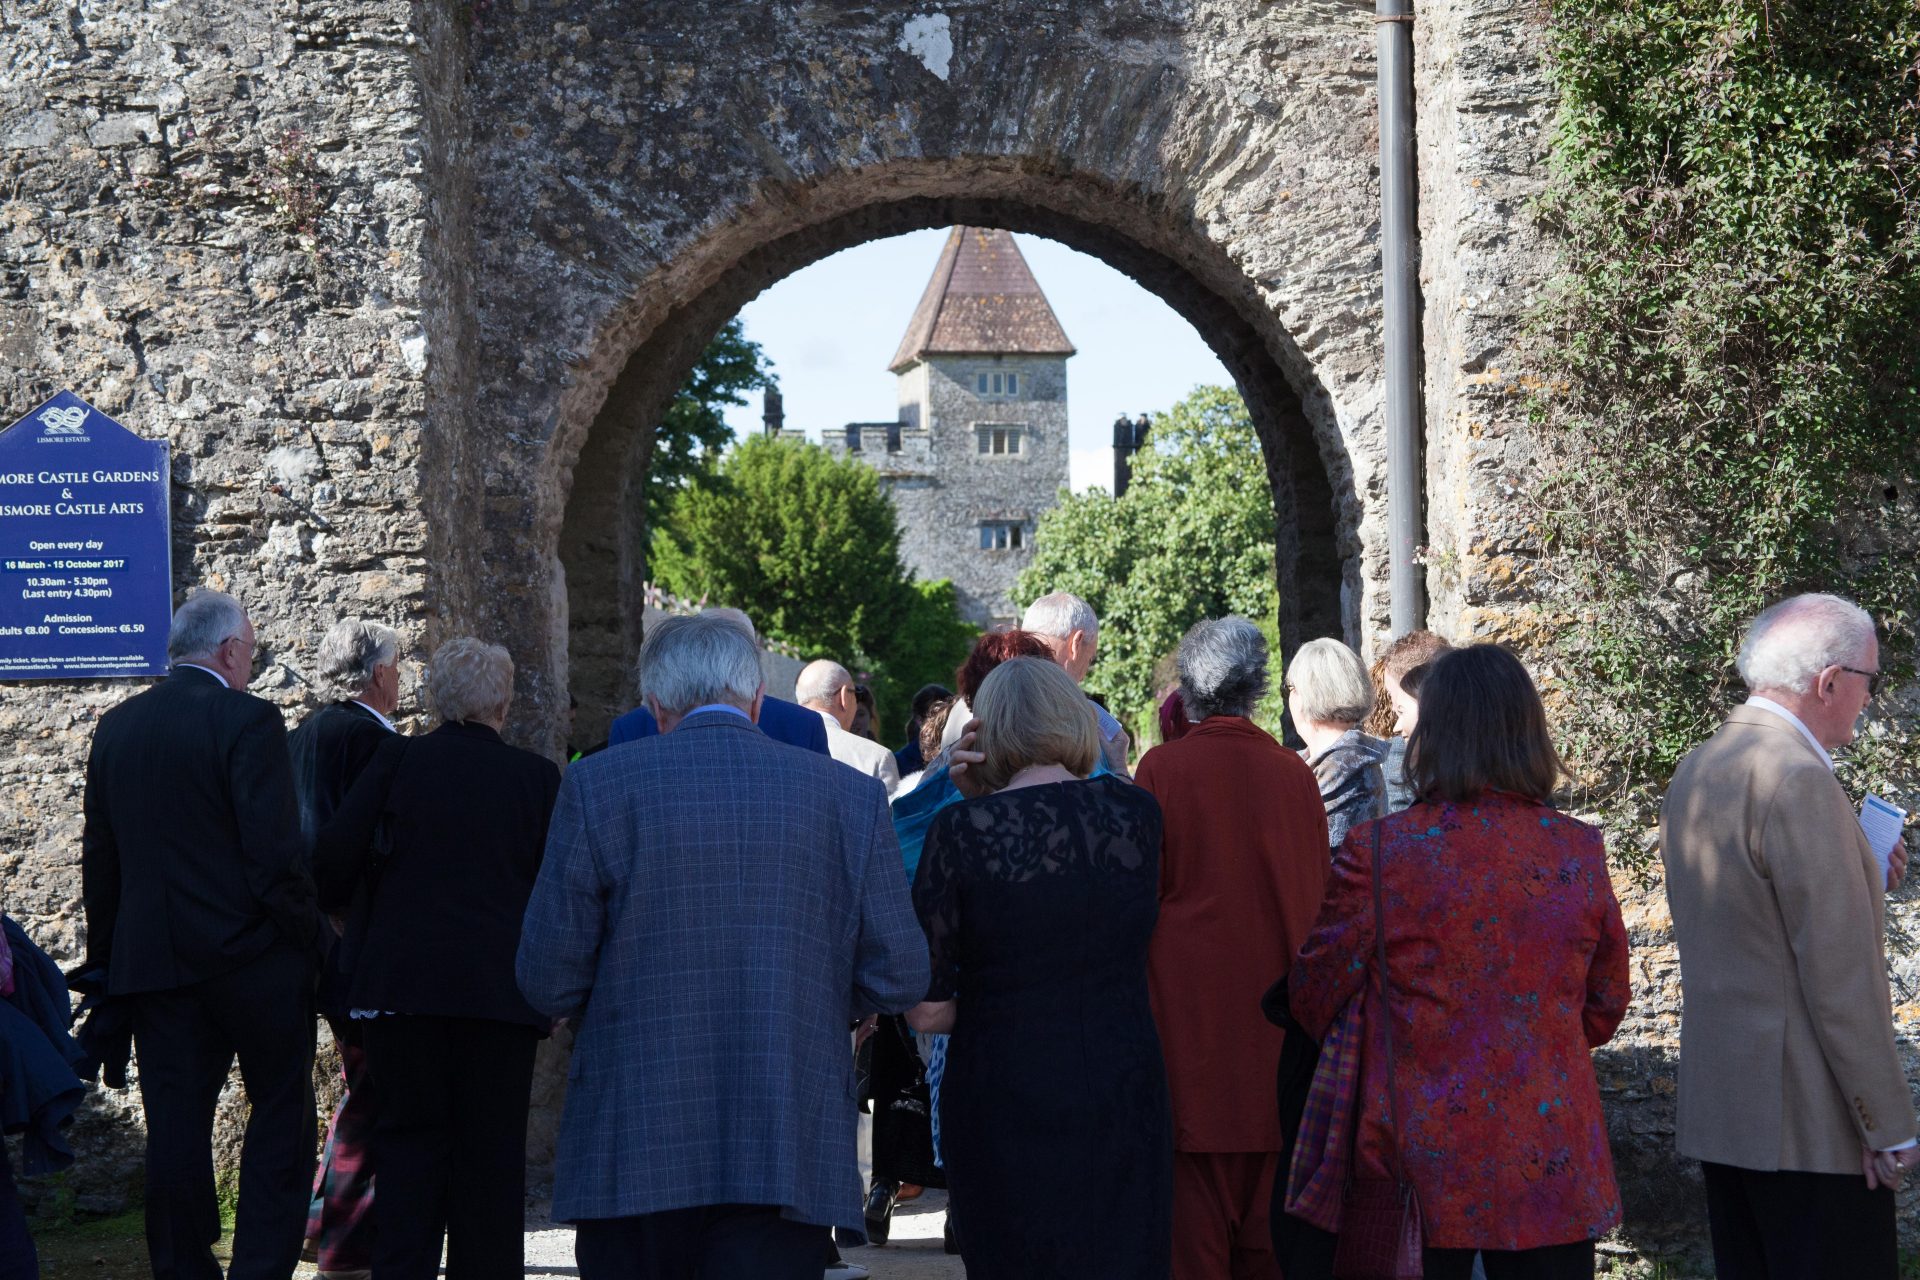 Group standing at the gates to Lismore Castle Arts